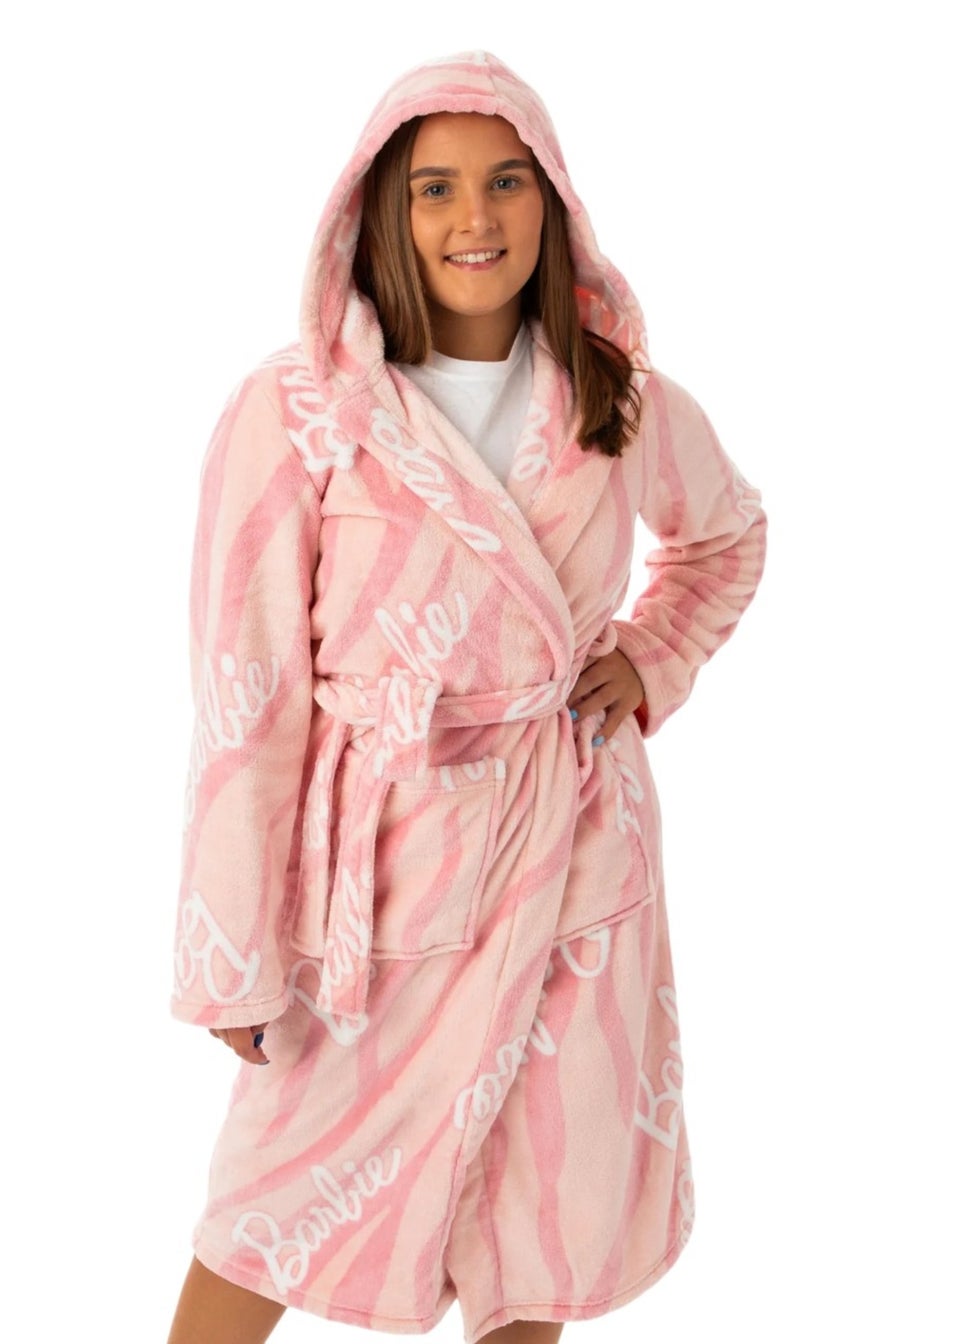 Barbie Pink Hooded Dressing Gown